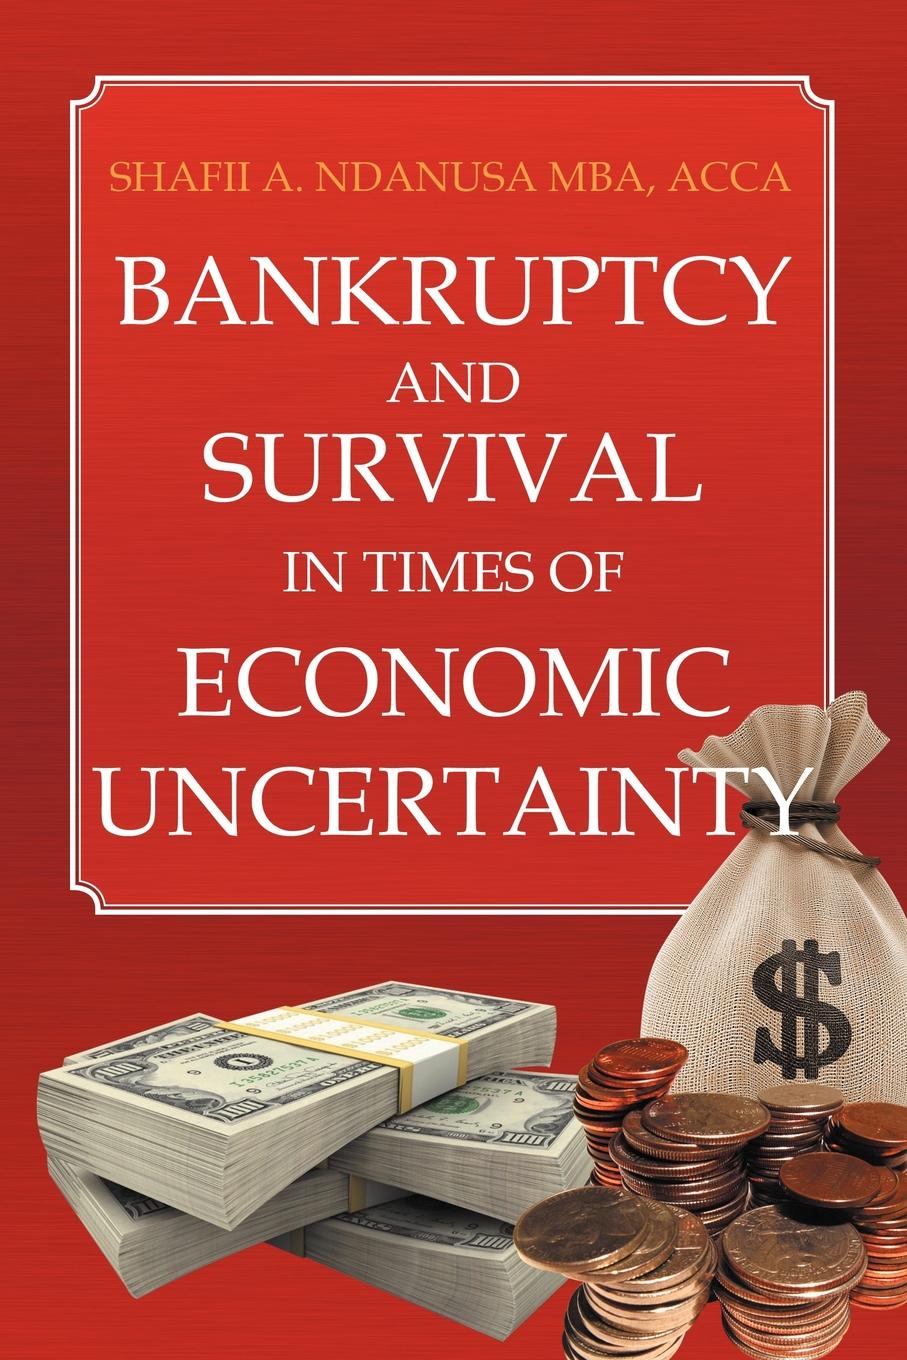 Bankruptcy And Survival In Times Of Economic Uncertainty. Practical Tips for Surviving the Economic Downturn/Recession